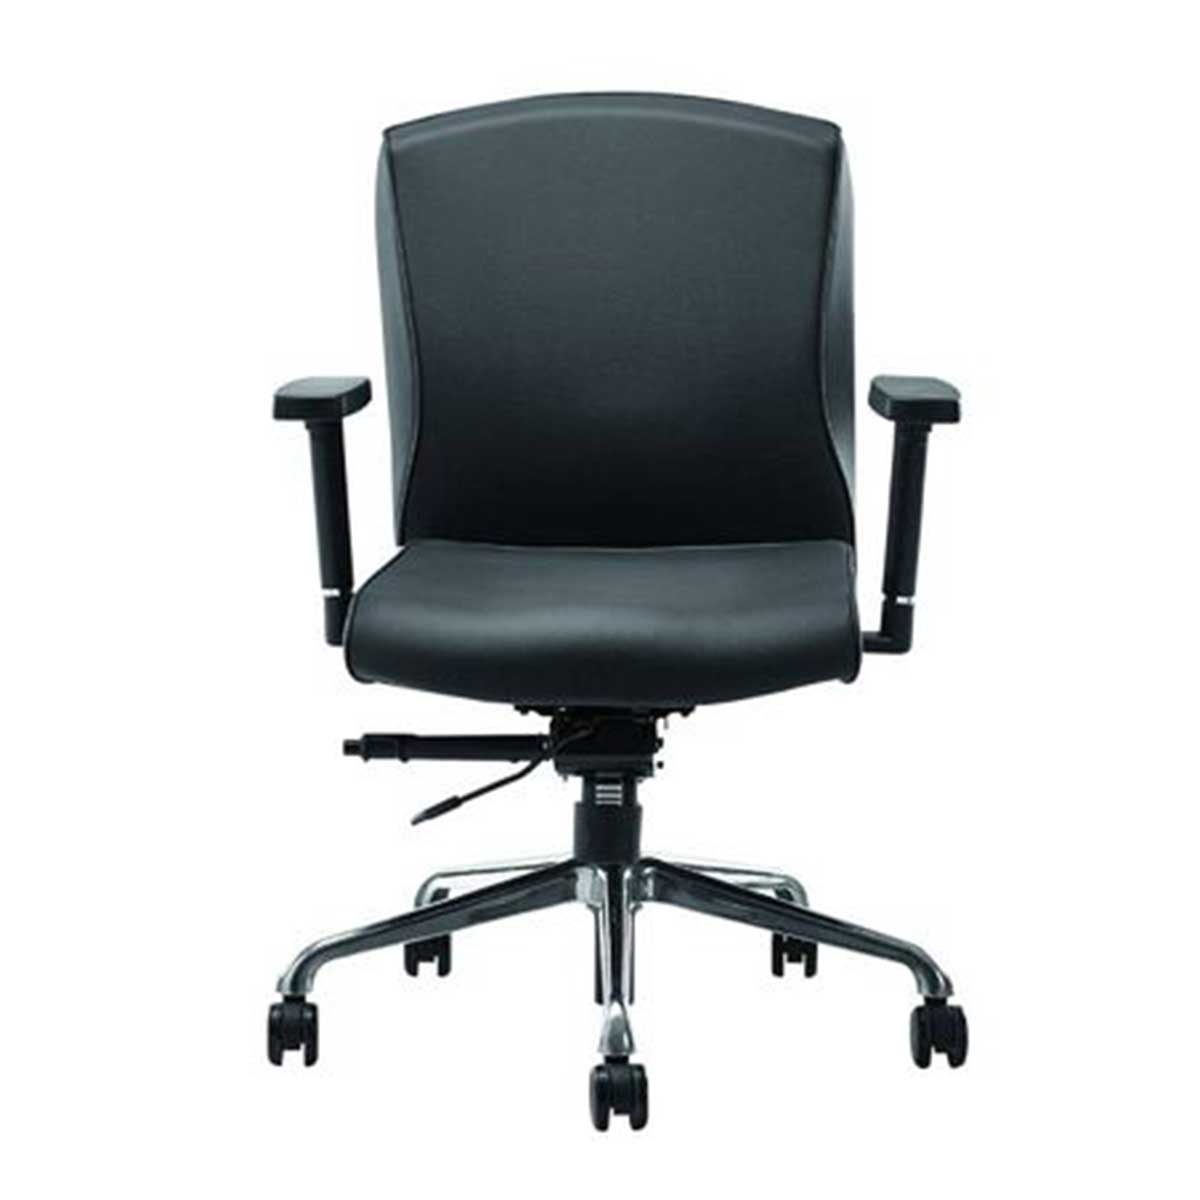 Low Back Office Chair Manufacturers, Suppliers in Paschim Vihar